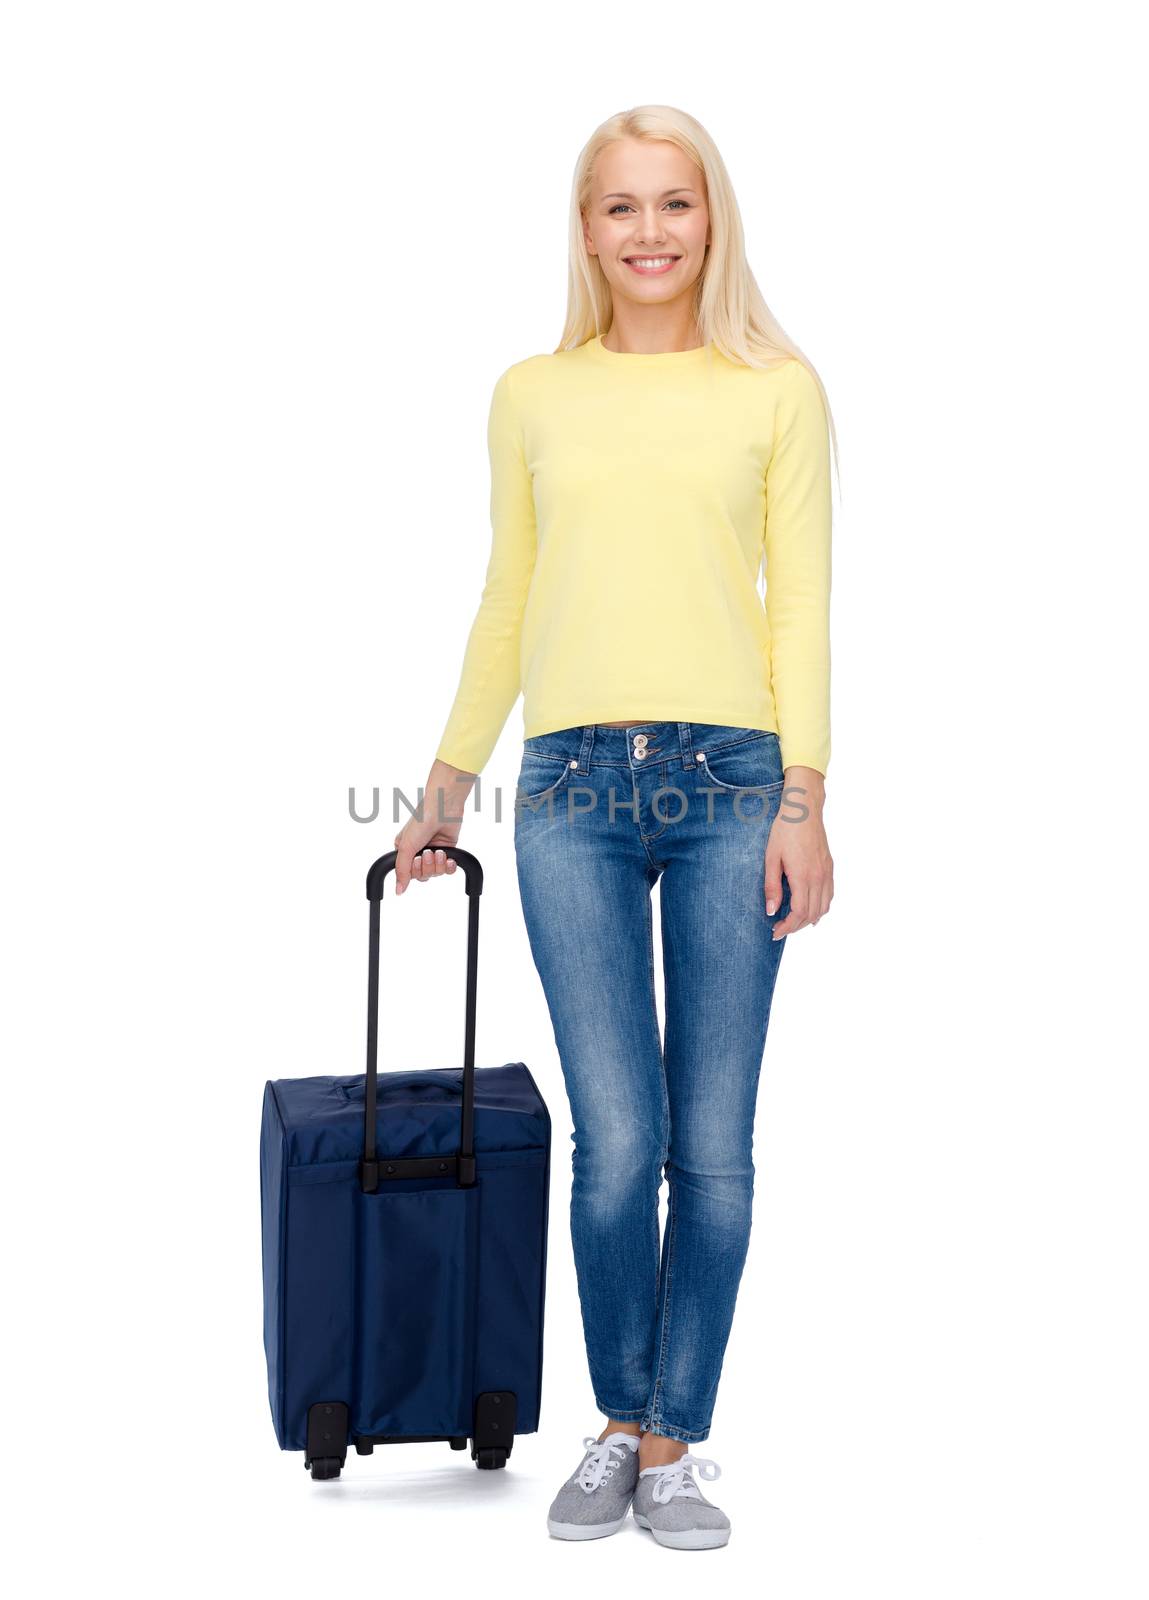 travel and vacation concept - smiling young woman with suitcase